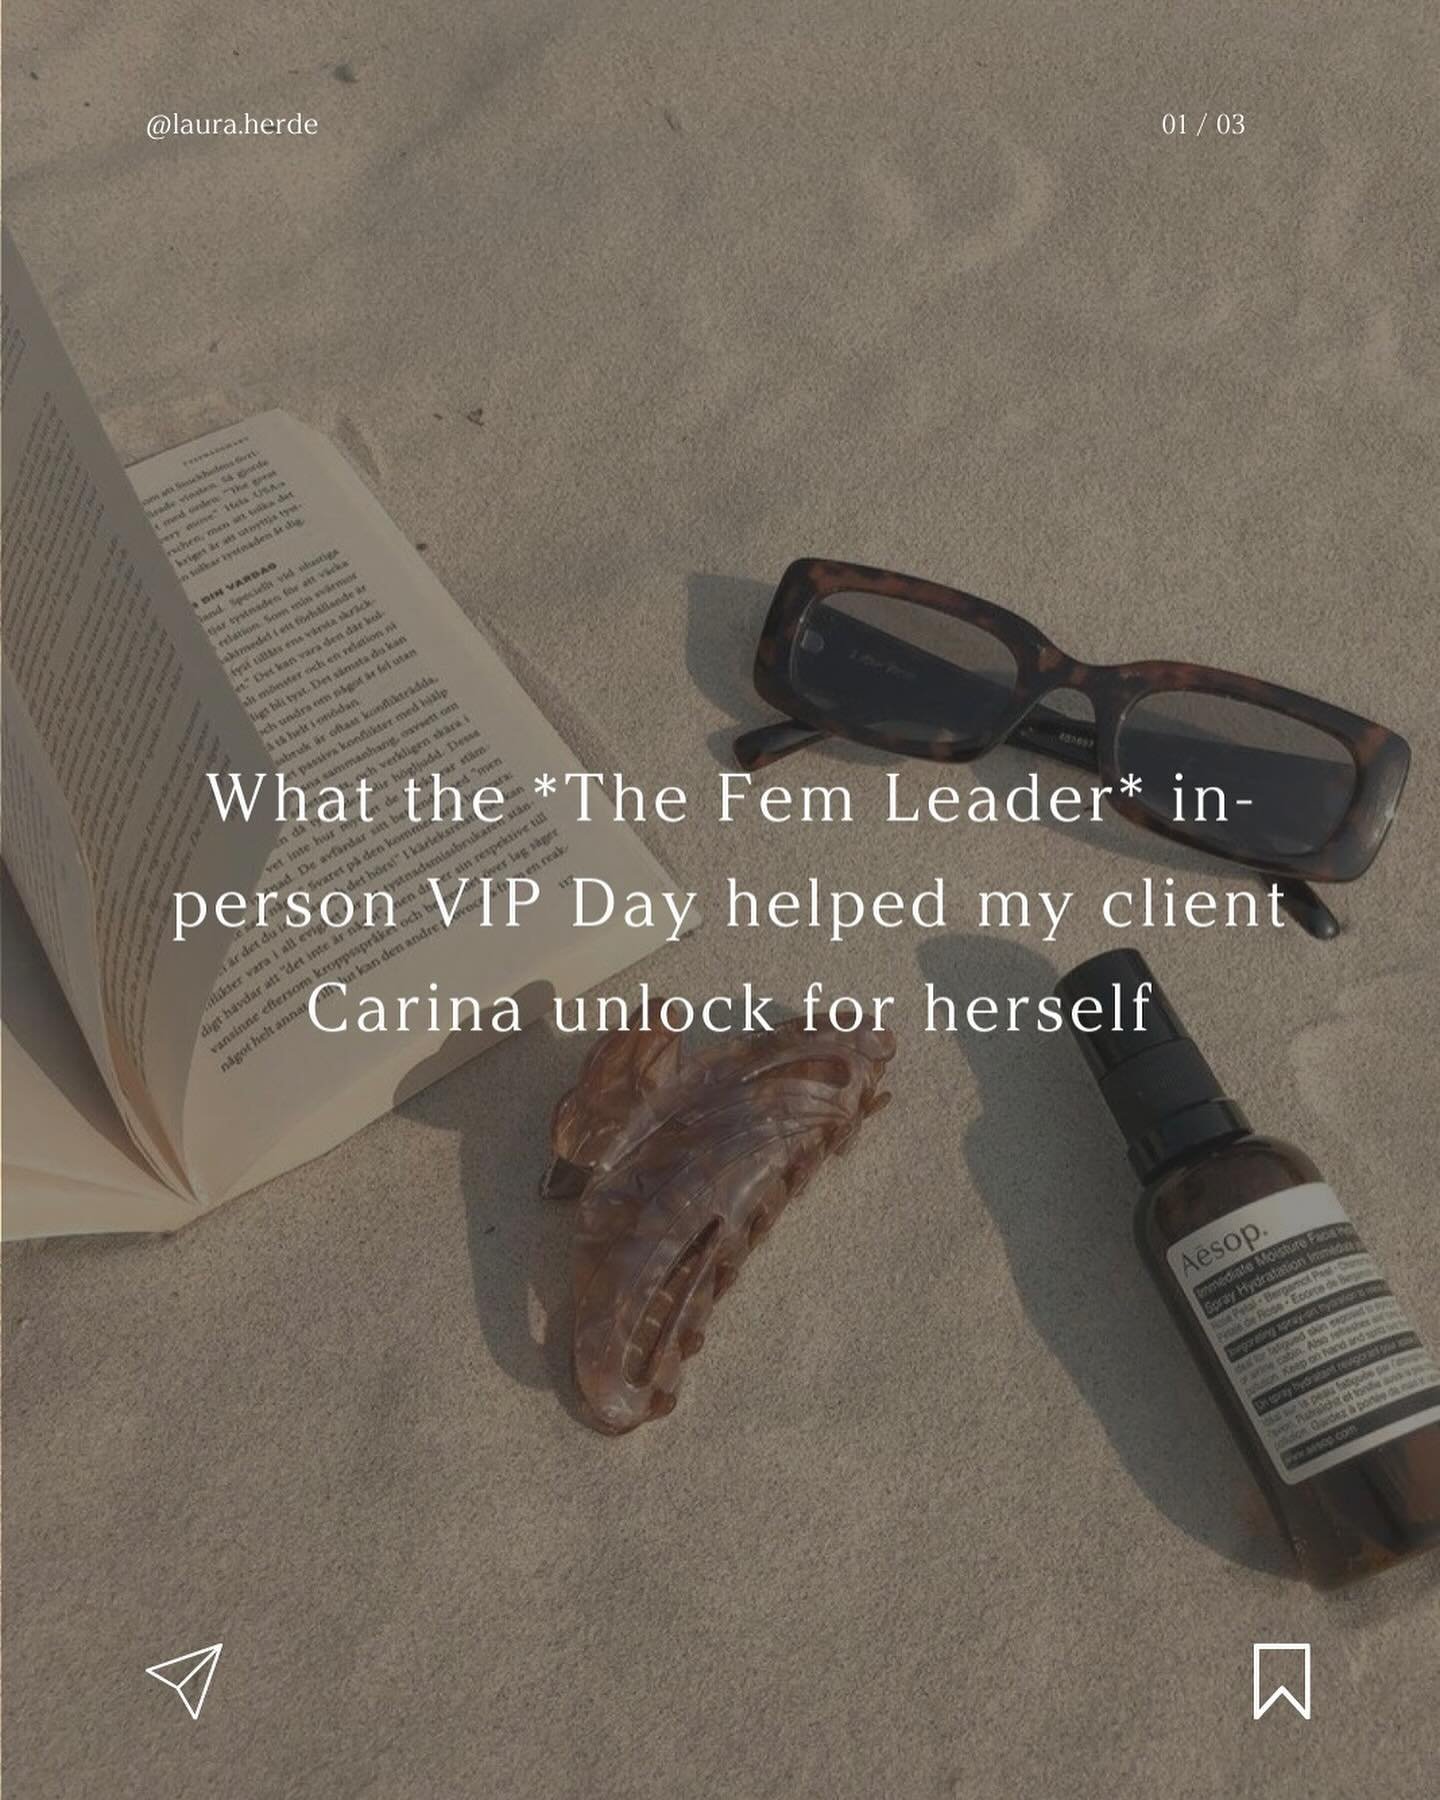 How my client Carina unlocked the next level in her business [ swipe through and save for later ] 🔥
⠀⠀⠀⠀⠀⠀⠀⠀⠀
Get this &mdash; the in-person VIP day in Bali is just ONE of the epic bonuses of my Mastermind 🤭🤯🤗
⠀⠀⠀⠀⠀⠀⠀⠀⠀
Curious what becomes possi